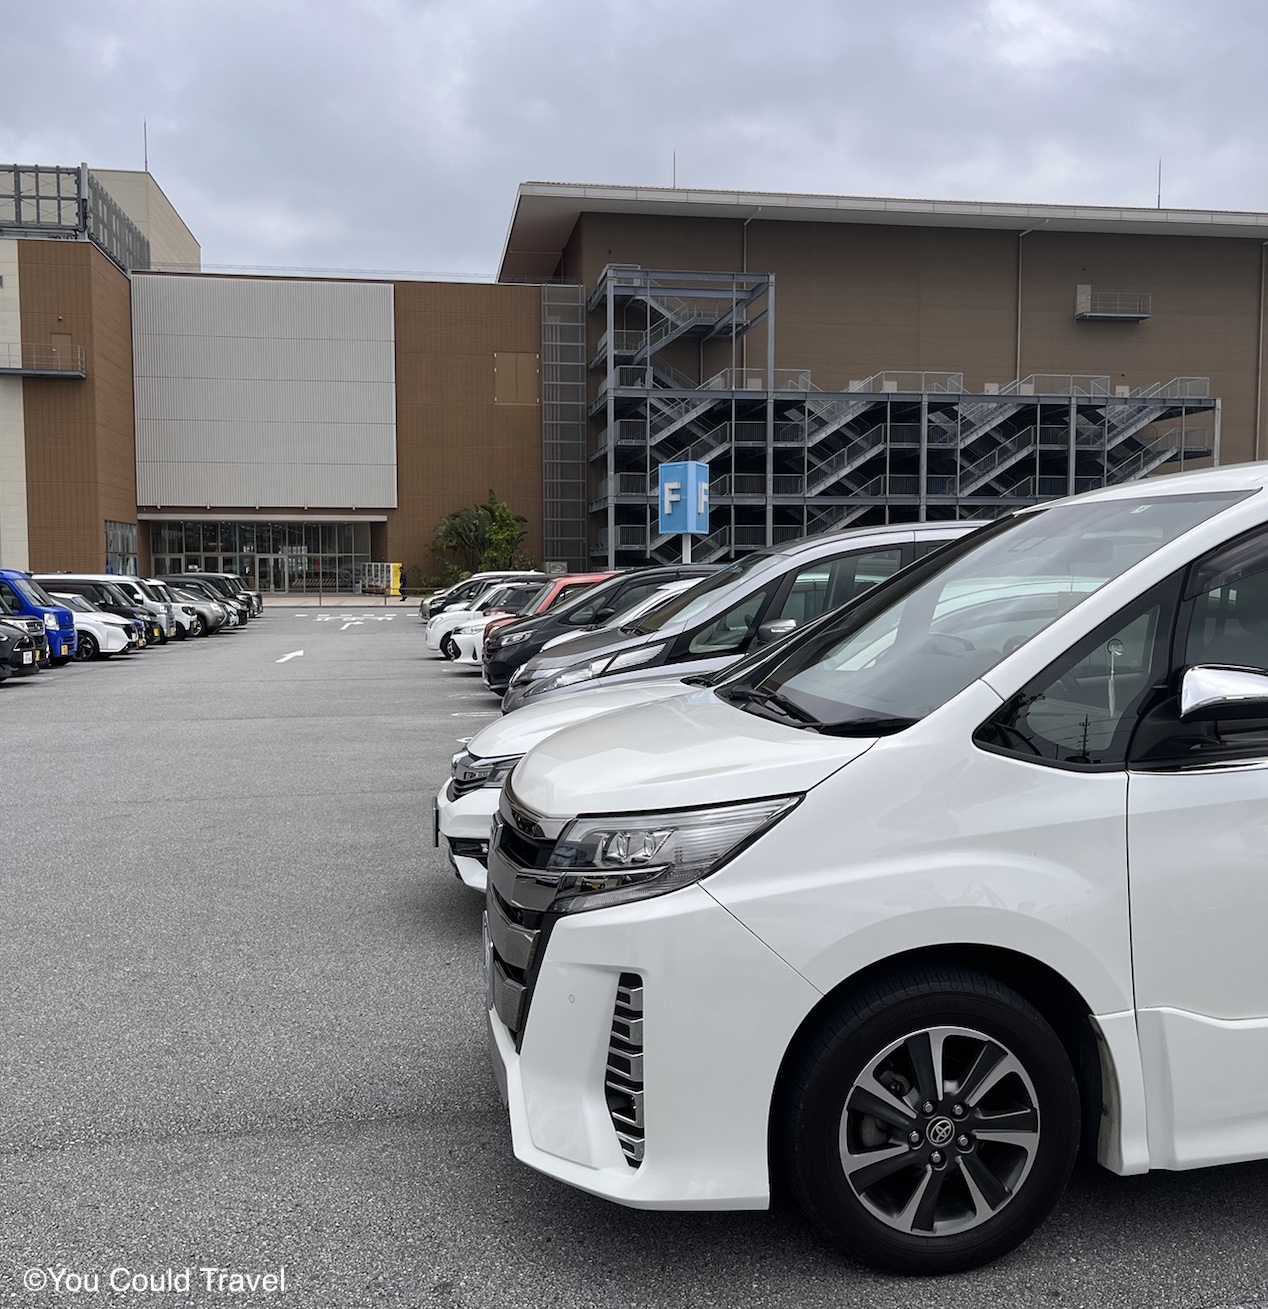 The cars in Okinawa reverse park